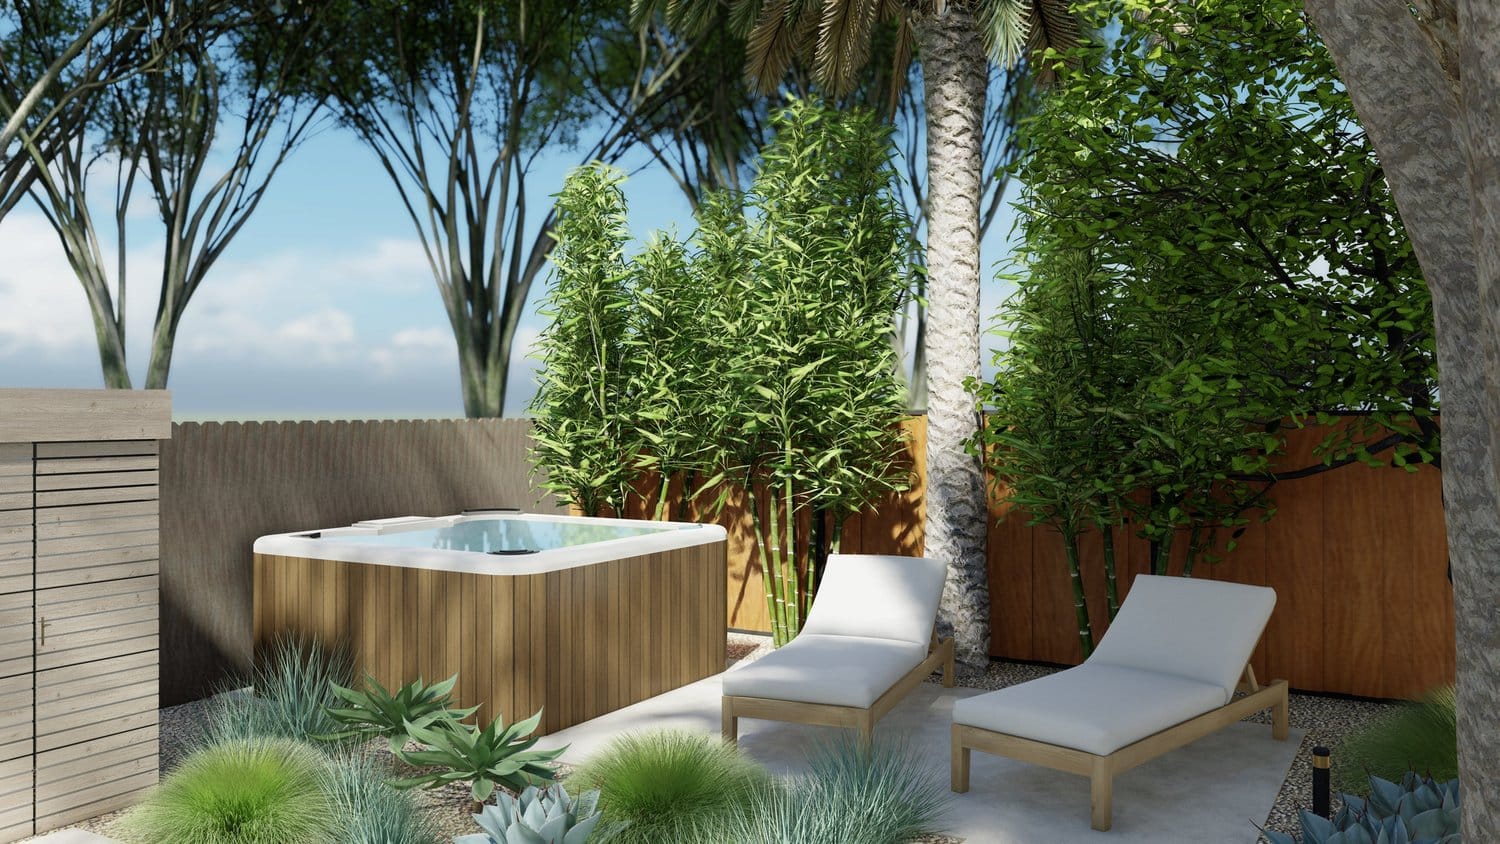 San Francisco patio with hot tub and chaise lounge set